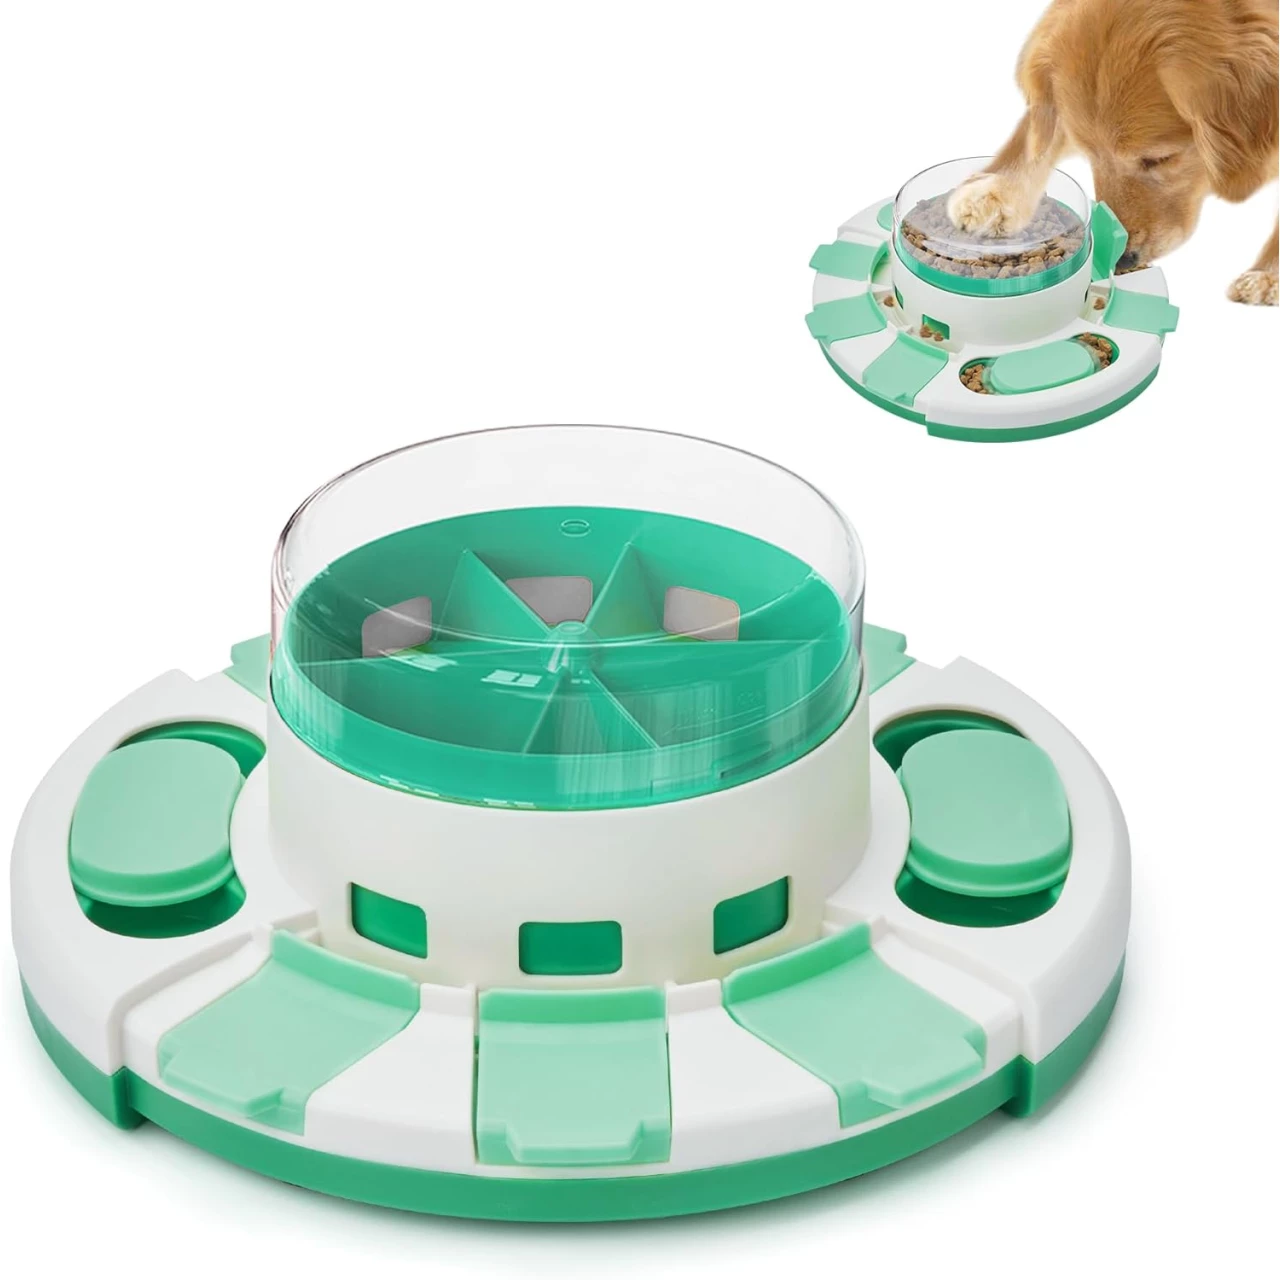 Potaroma Dog Puzzle Toy 2 Levels, Slow Feeder for Large Small Dogs